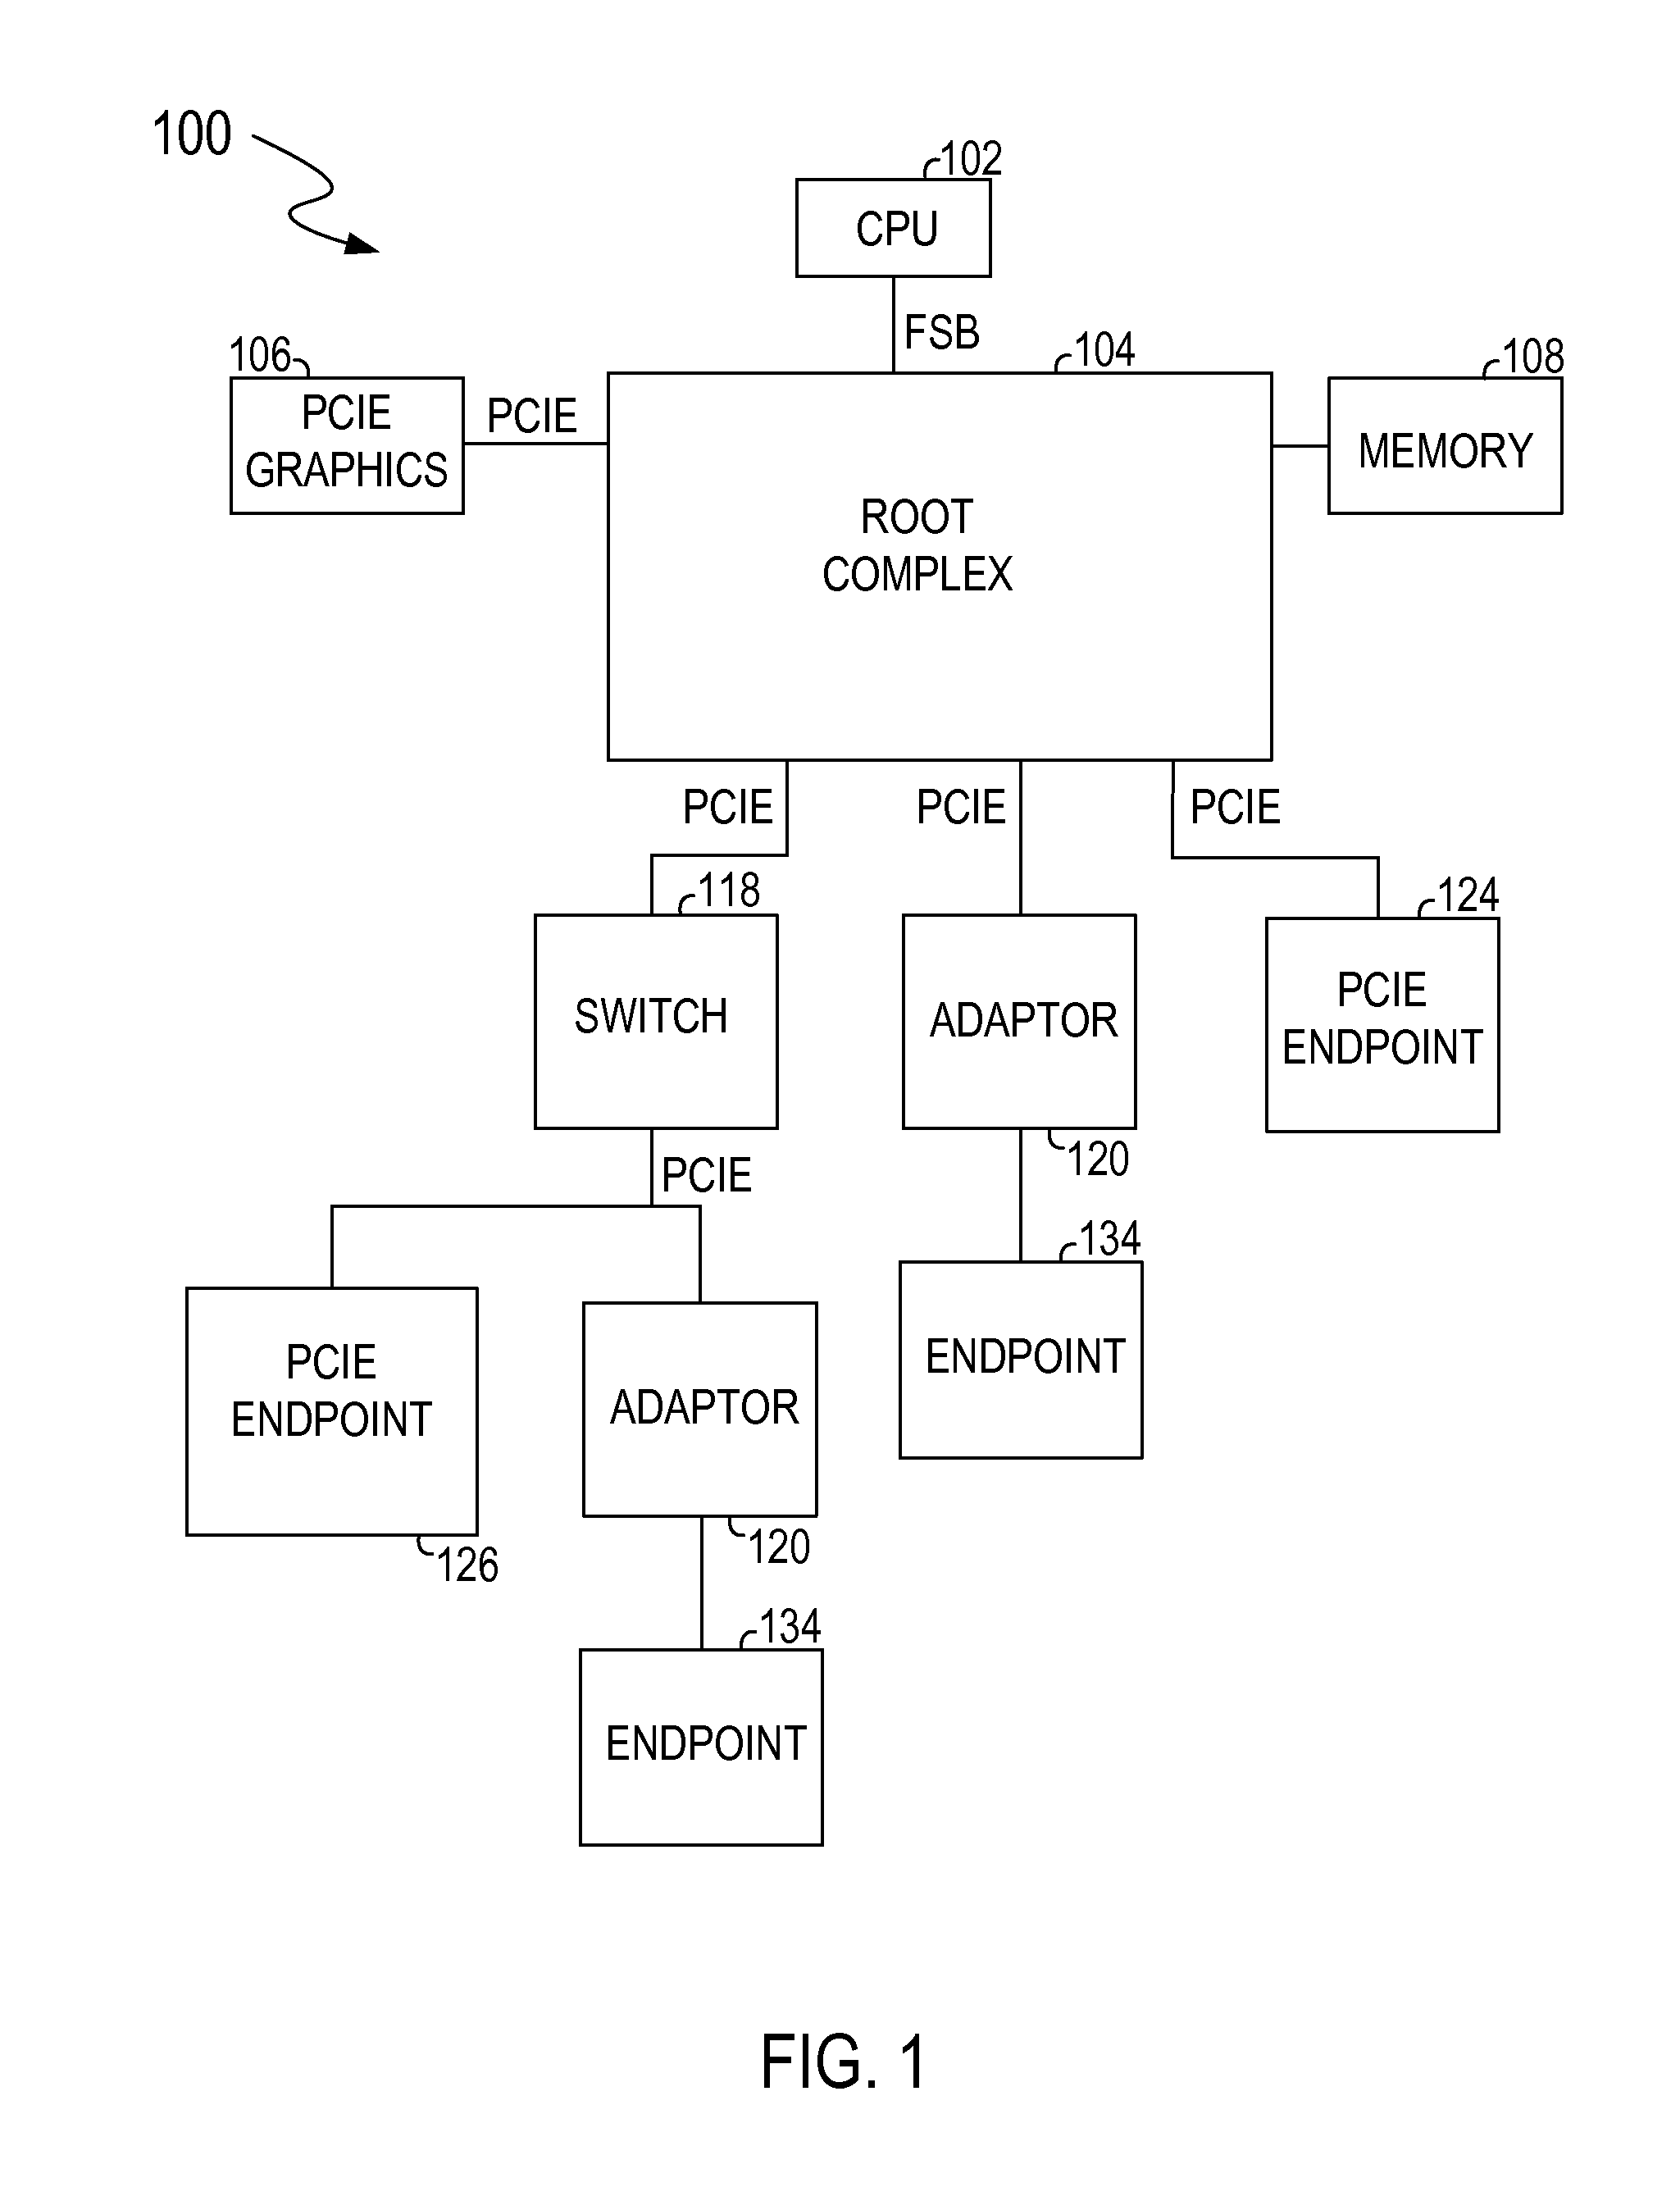 Use of bond option to alternate between PCI configuration space